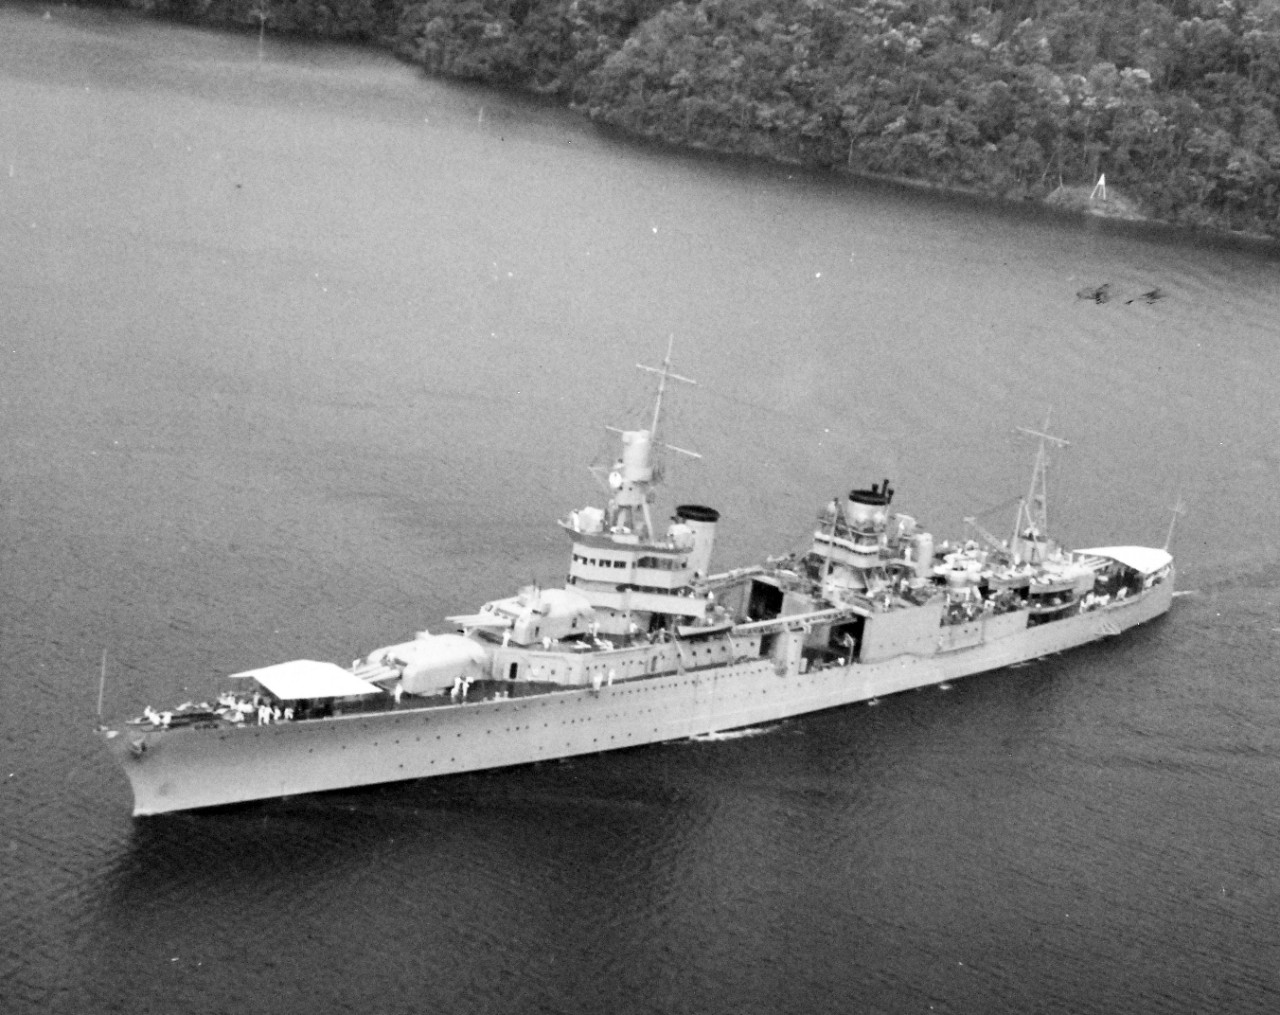 80-G-466167:   USS Indianapolis (CA-35), March 4, 1933.   Aerial oblique view while passing through the Panama Canal.  Official U.S. Navy Photograph, now in the collections of the National Archives.  (2018/03/14).  